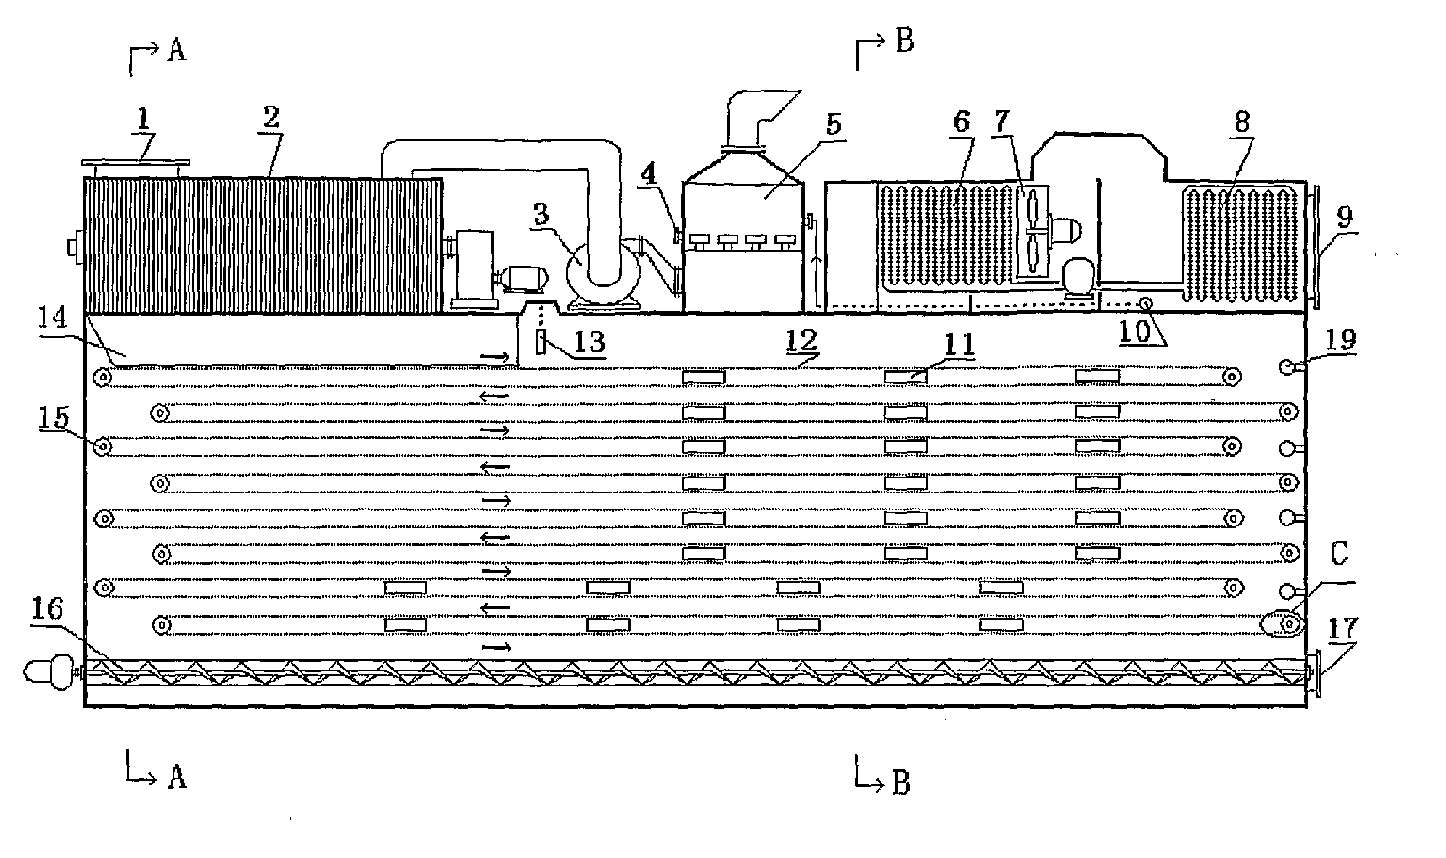 Method of Integration of Concentration-Dehydration and Aerobic Air-drying of Sewage Sludge